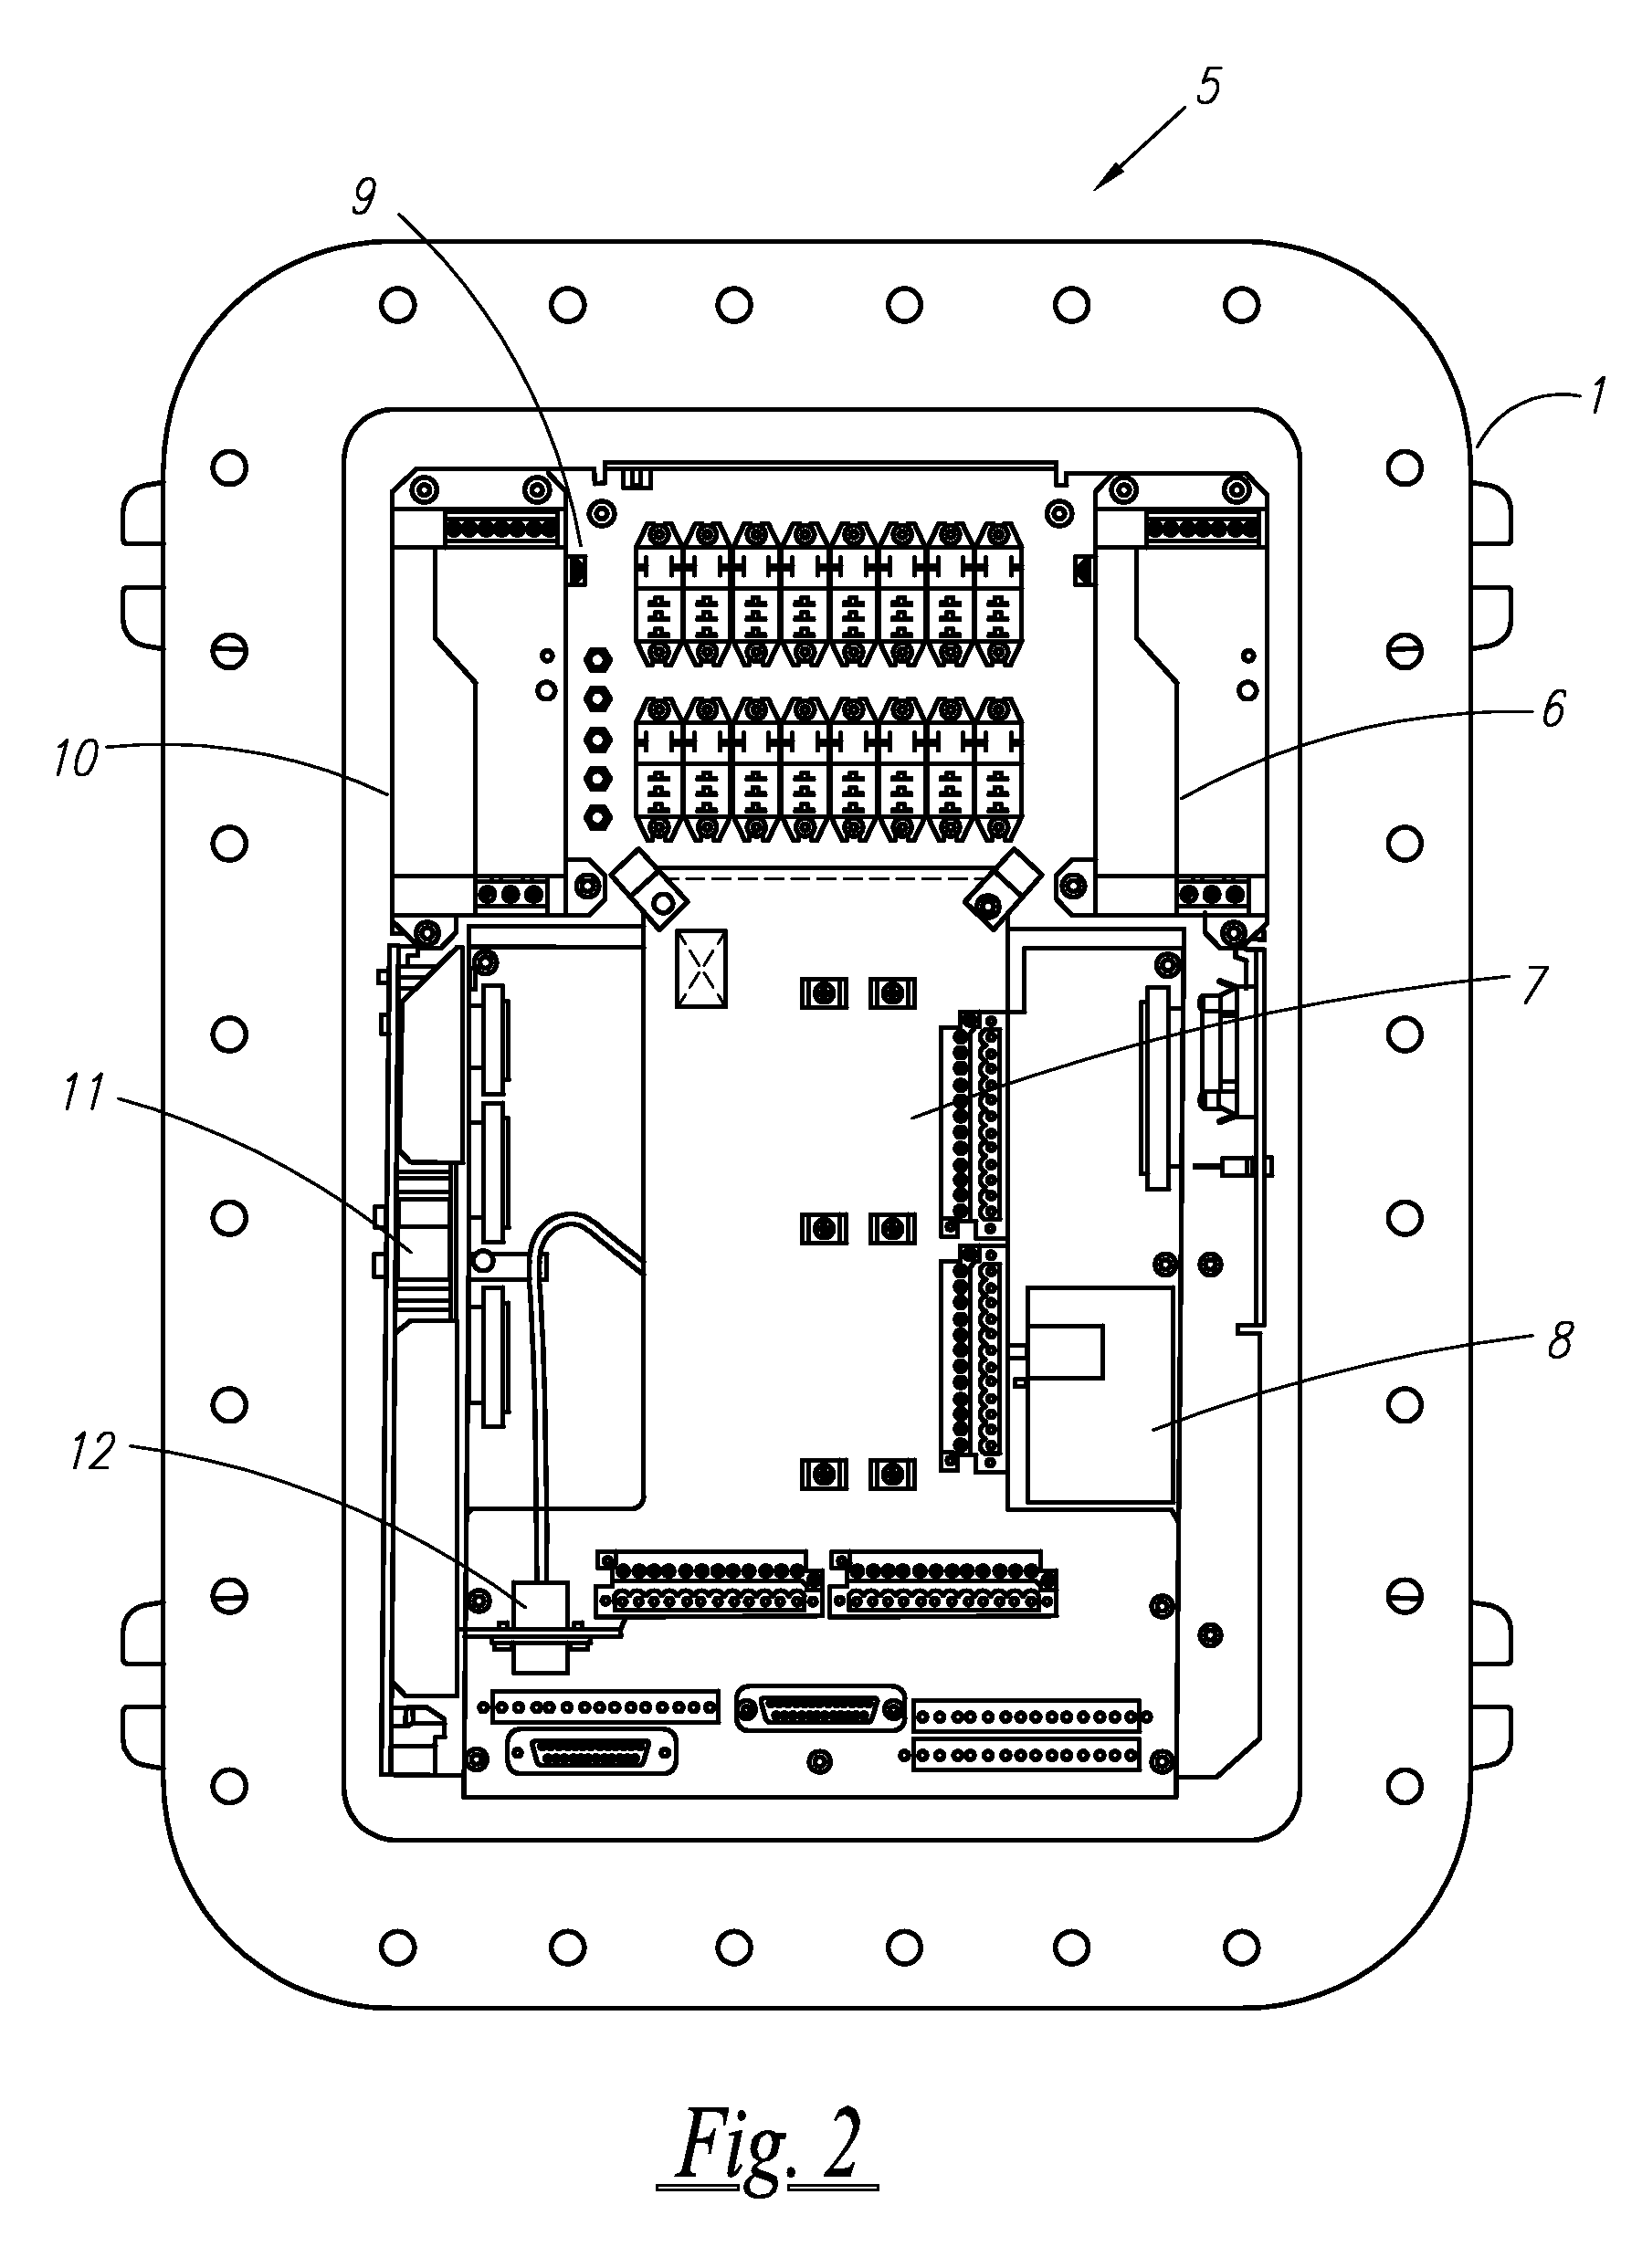 Actuator controller for monitoring health and status of the actuator and/or other equipment